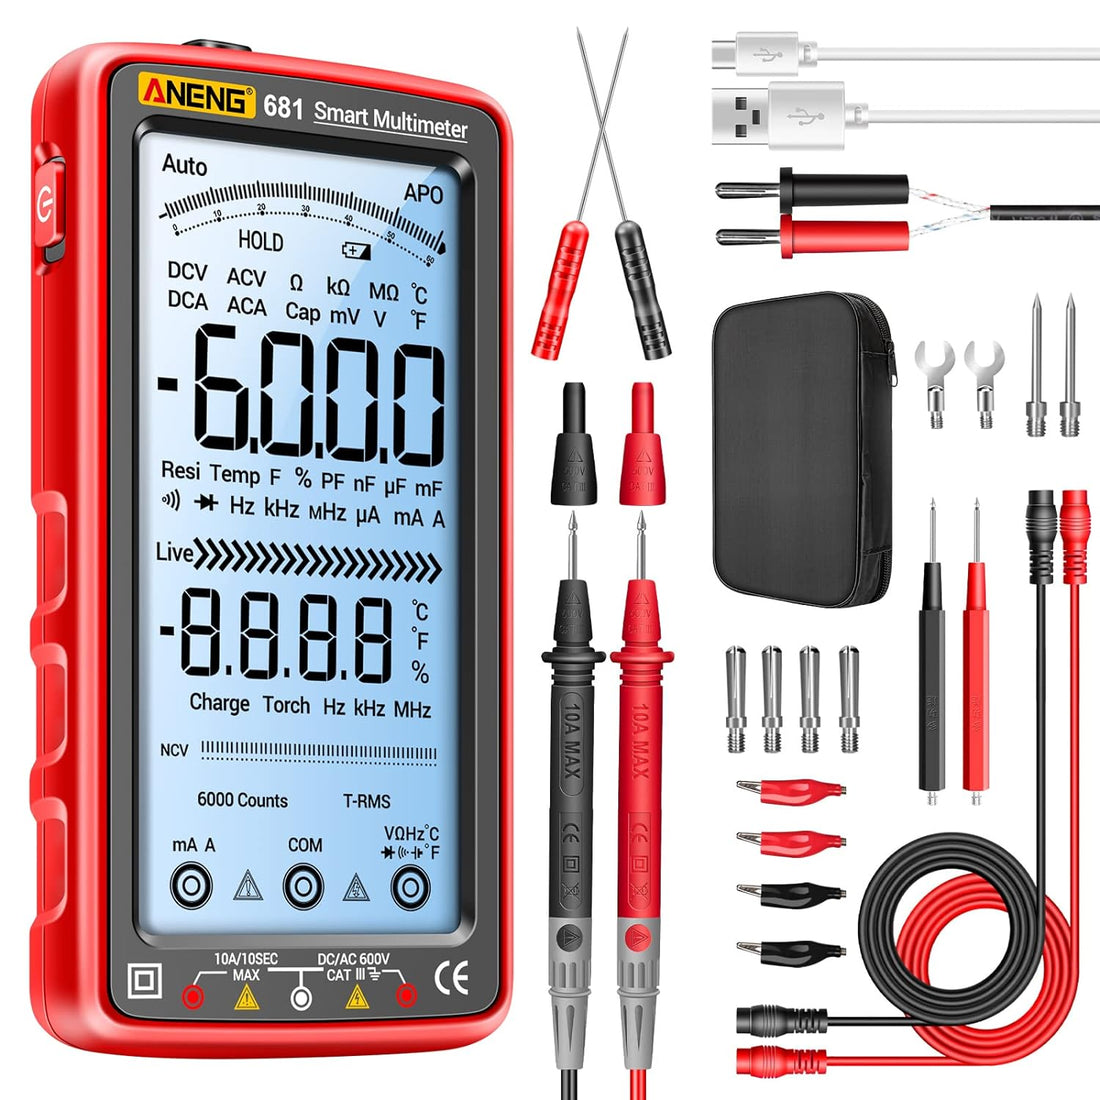 ANENG Digital Multimeter Tester Auto-Ranging TRMS 6000 Counts Voltmeter Smart Rechargeable Meter Measures NCV,AC/DC Current,Voltage,Ohm,Amp,Resistance,Diodes,Countinuity,Capacitance,Temperature